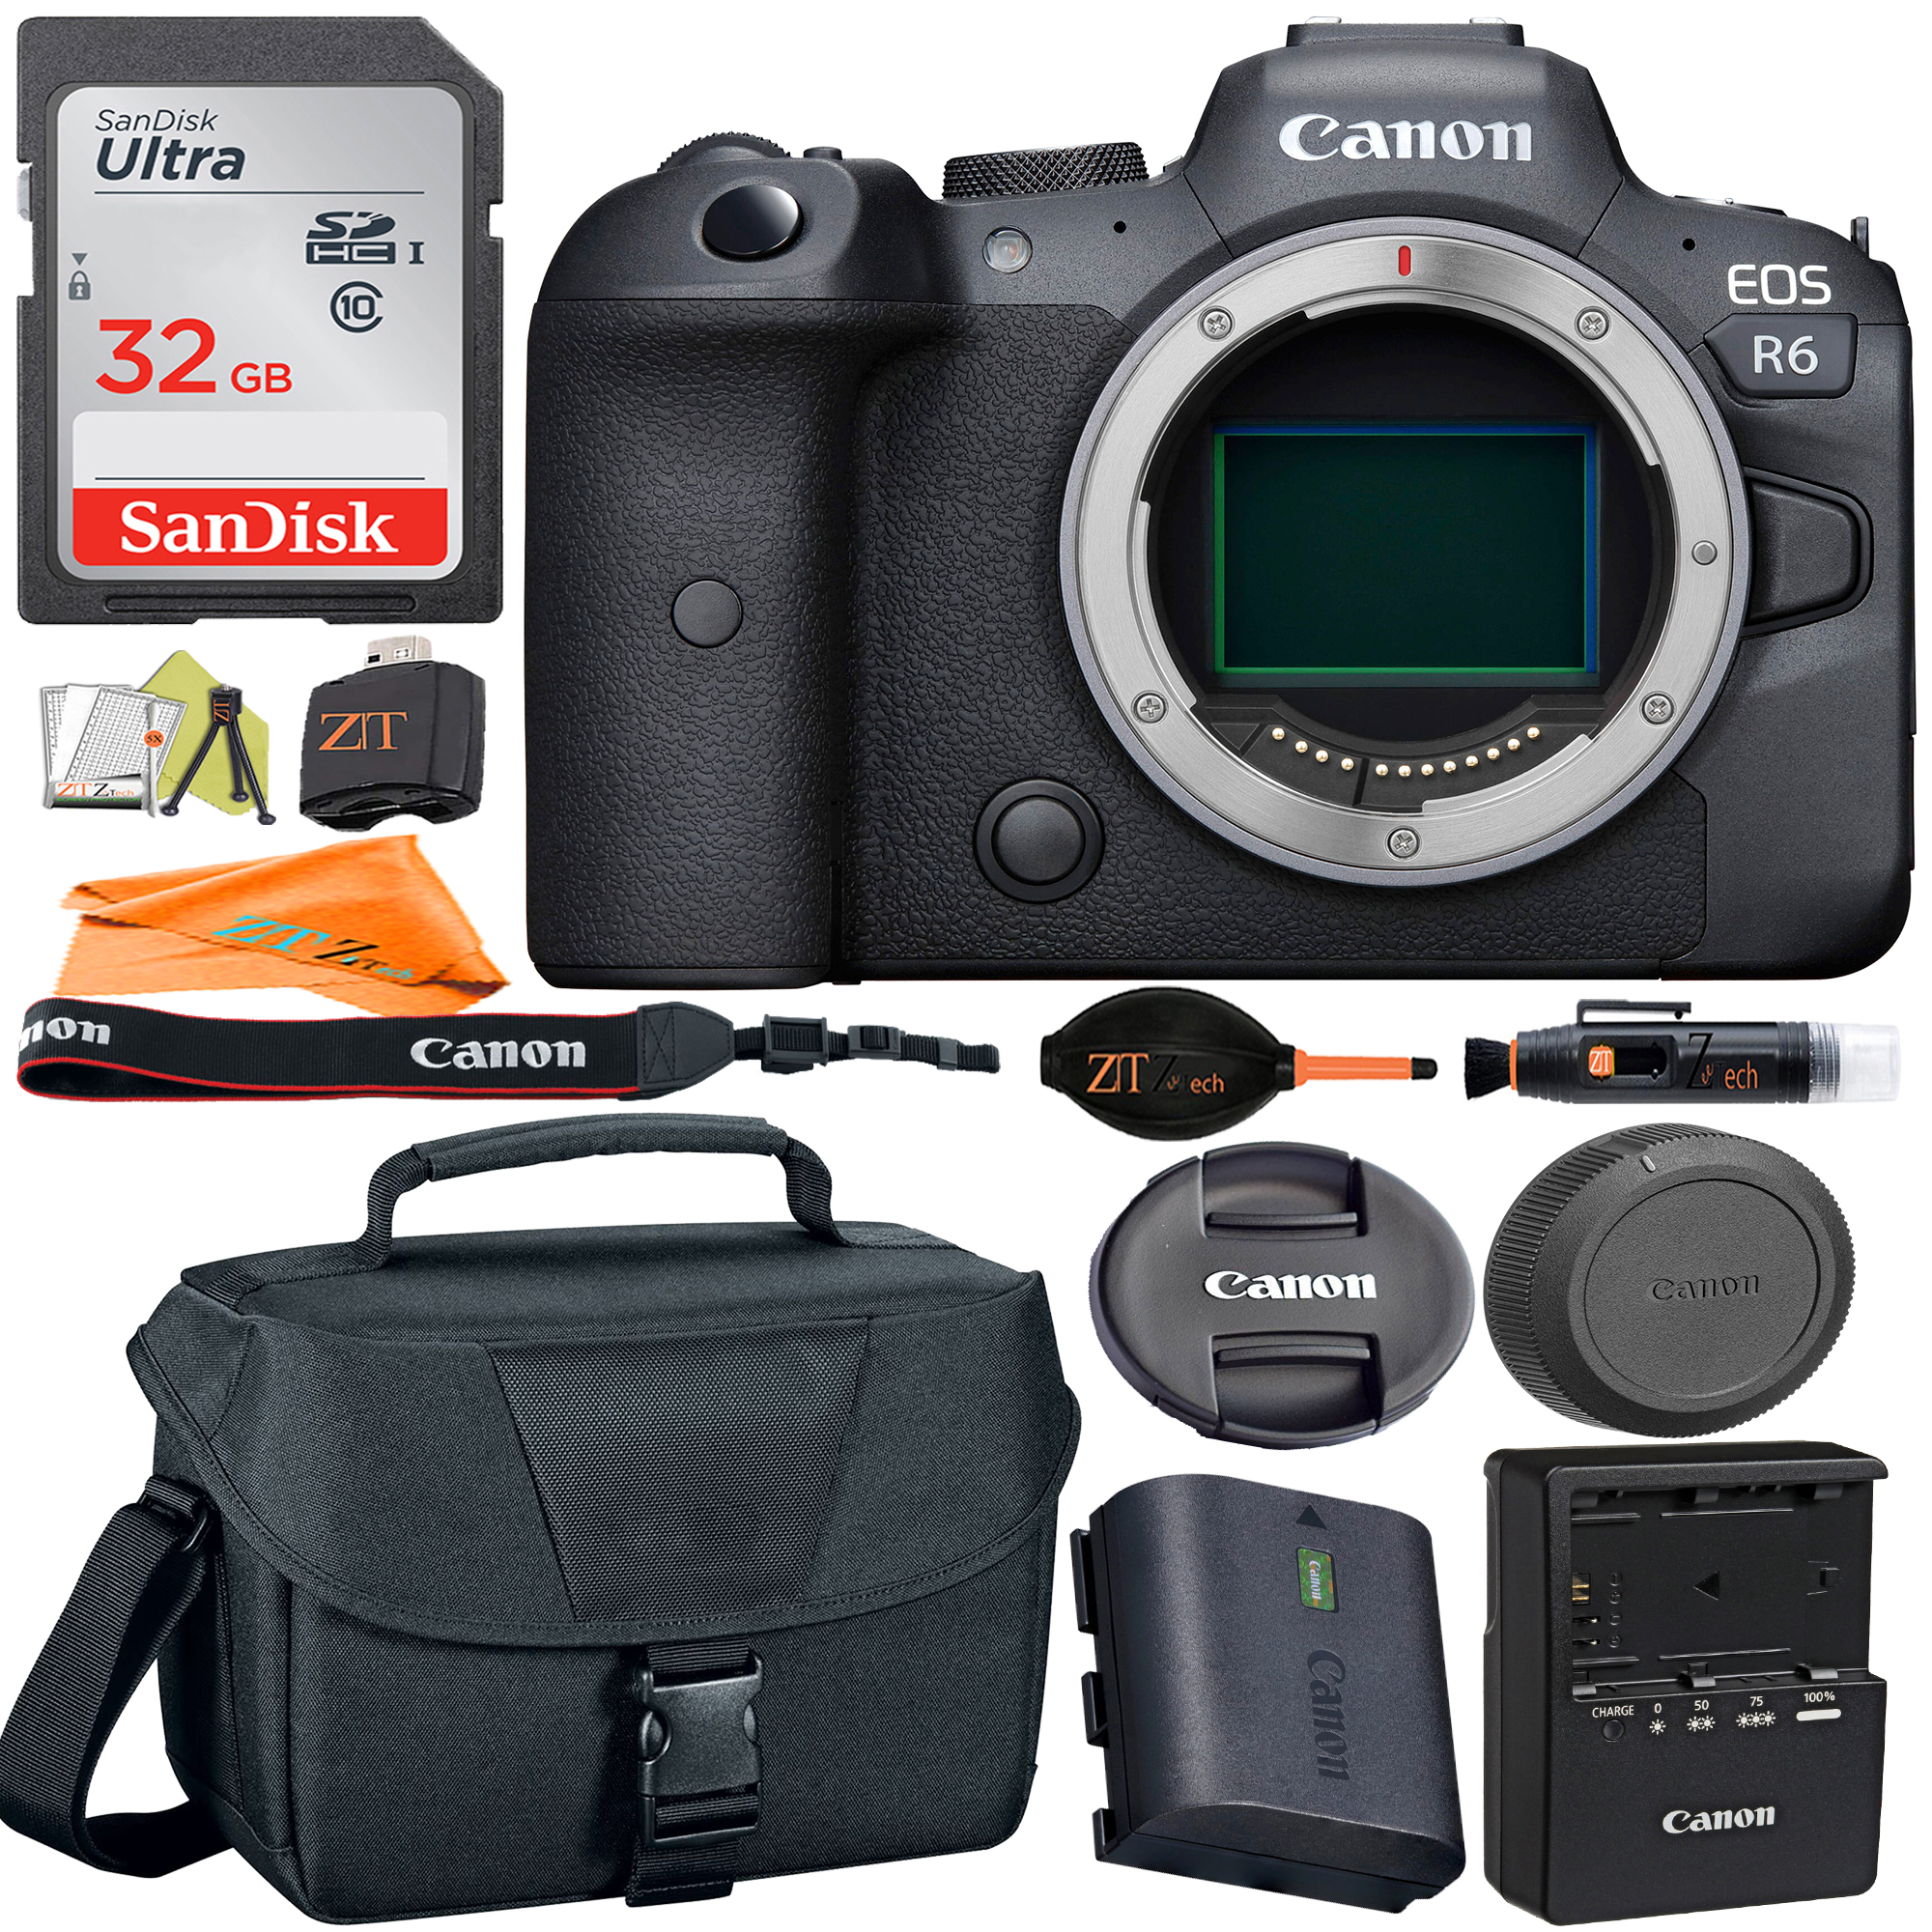 Canon EOS R6 Mirrorless Digital Camera (Body Only) 4K Video with SanDisk 32GB Memory Card + Case + ZeeTech Accessory Bundle